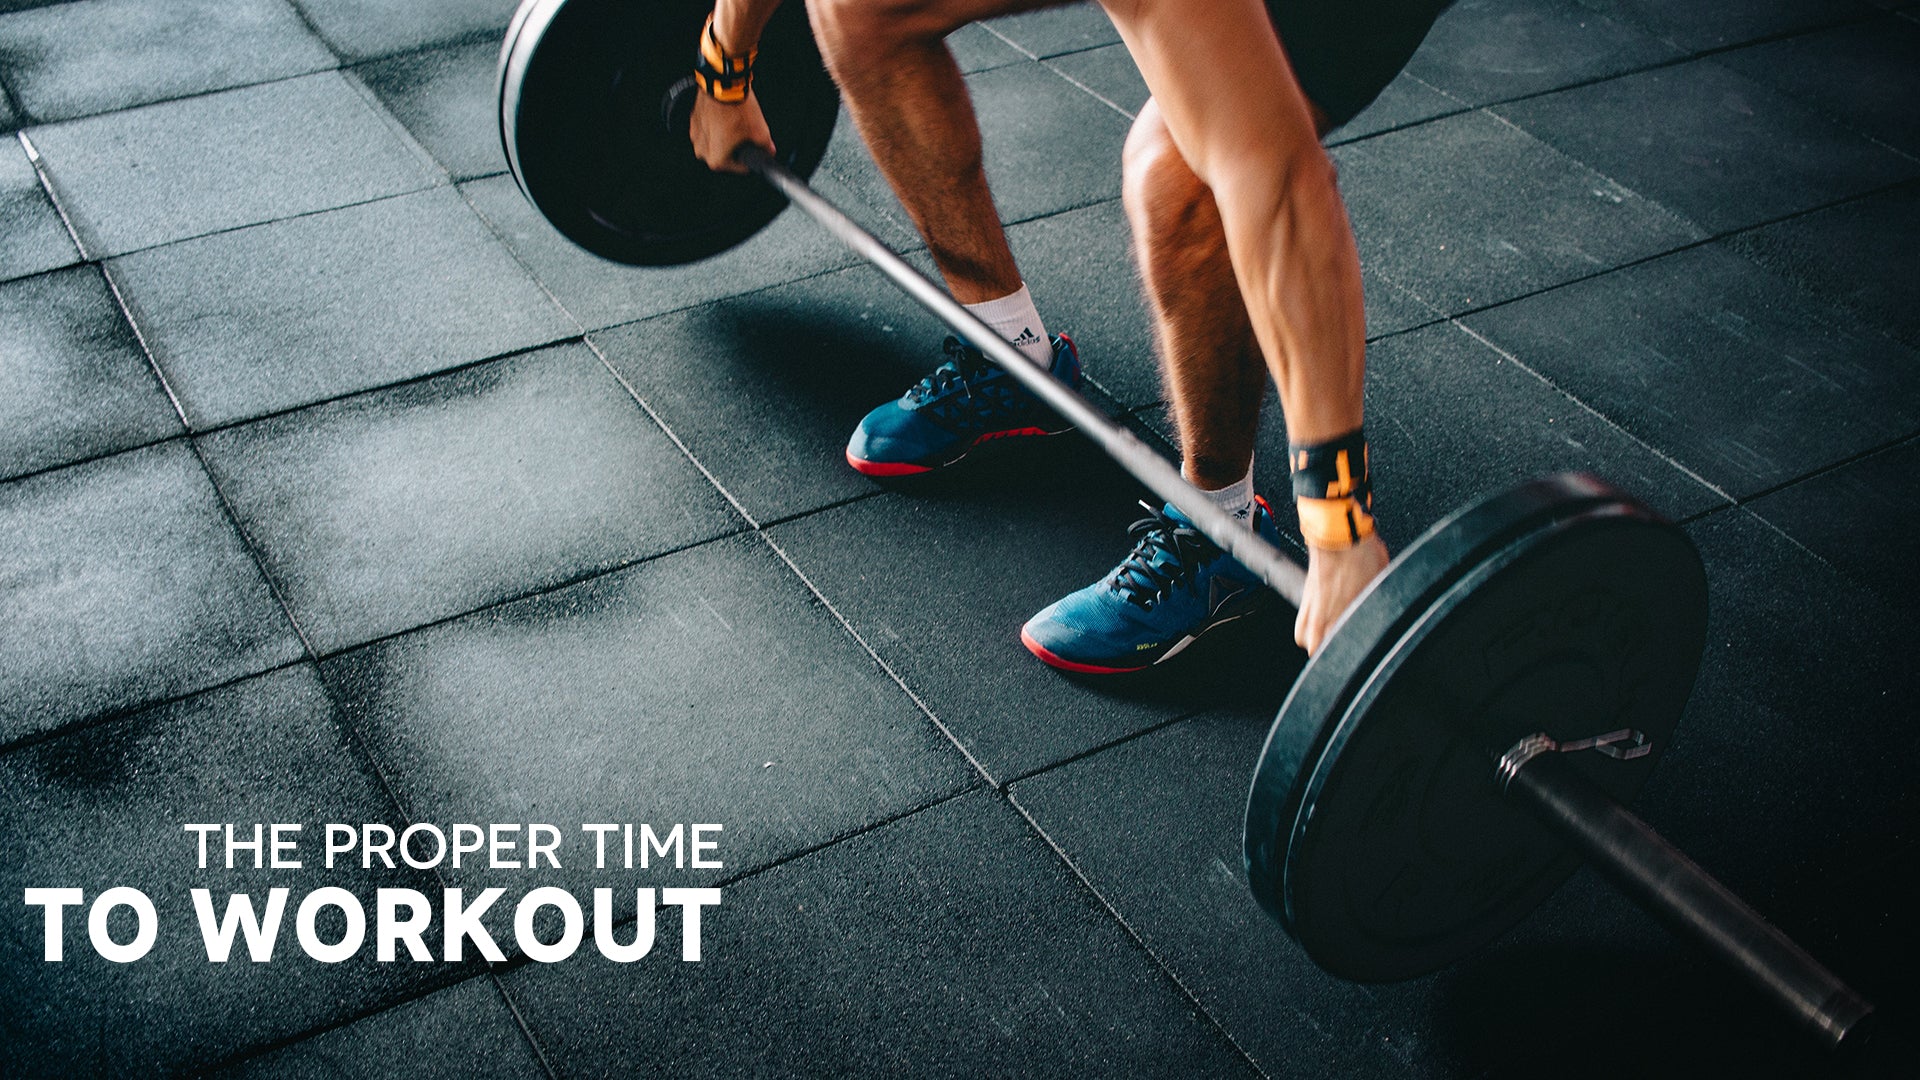 The proper time to workout